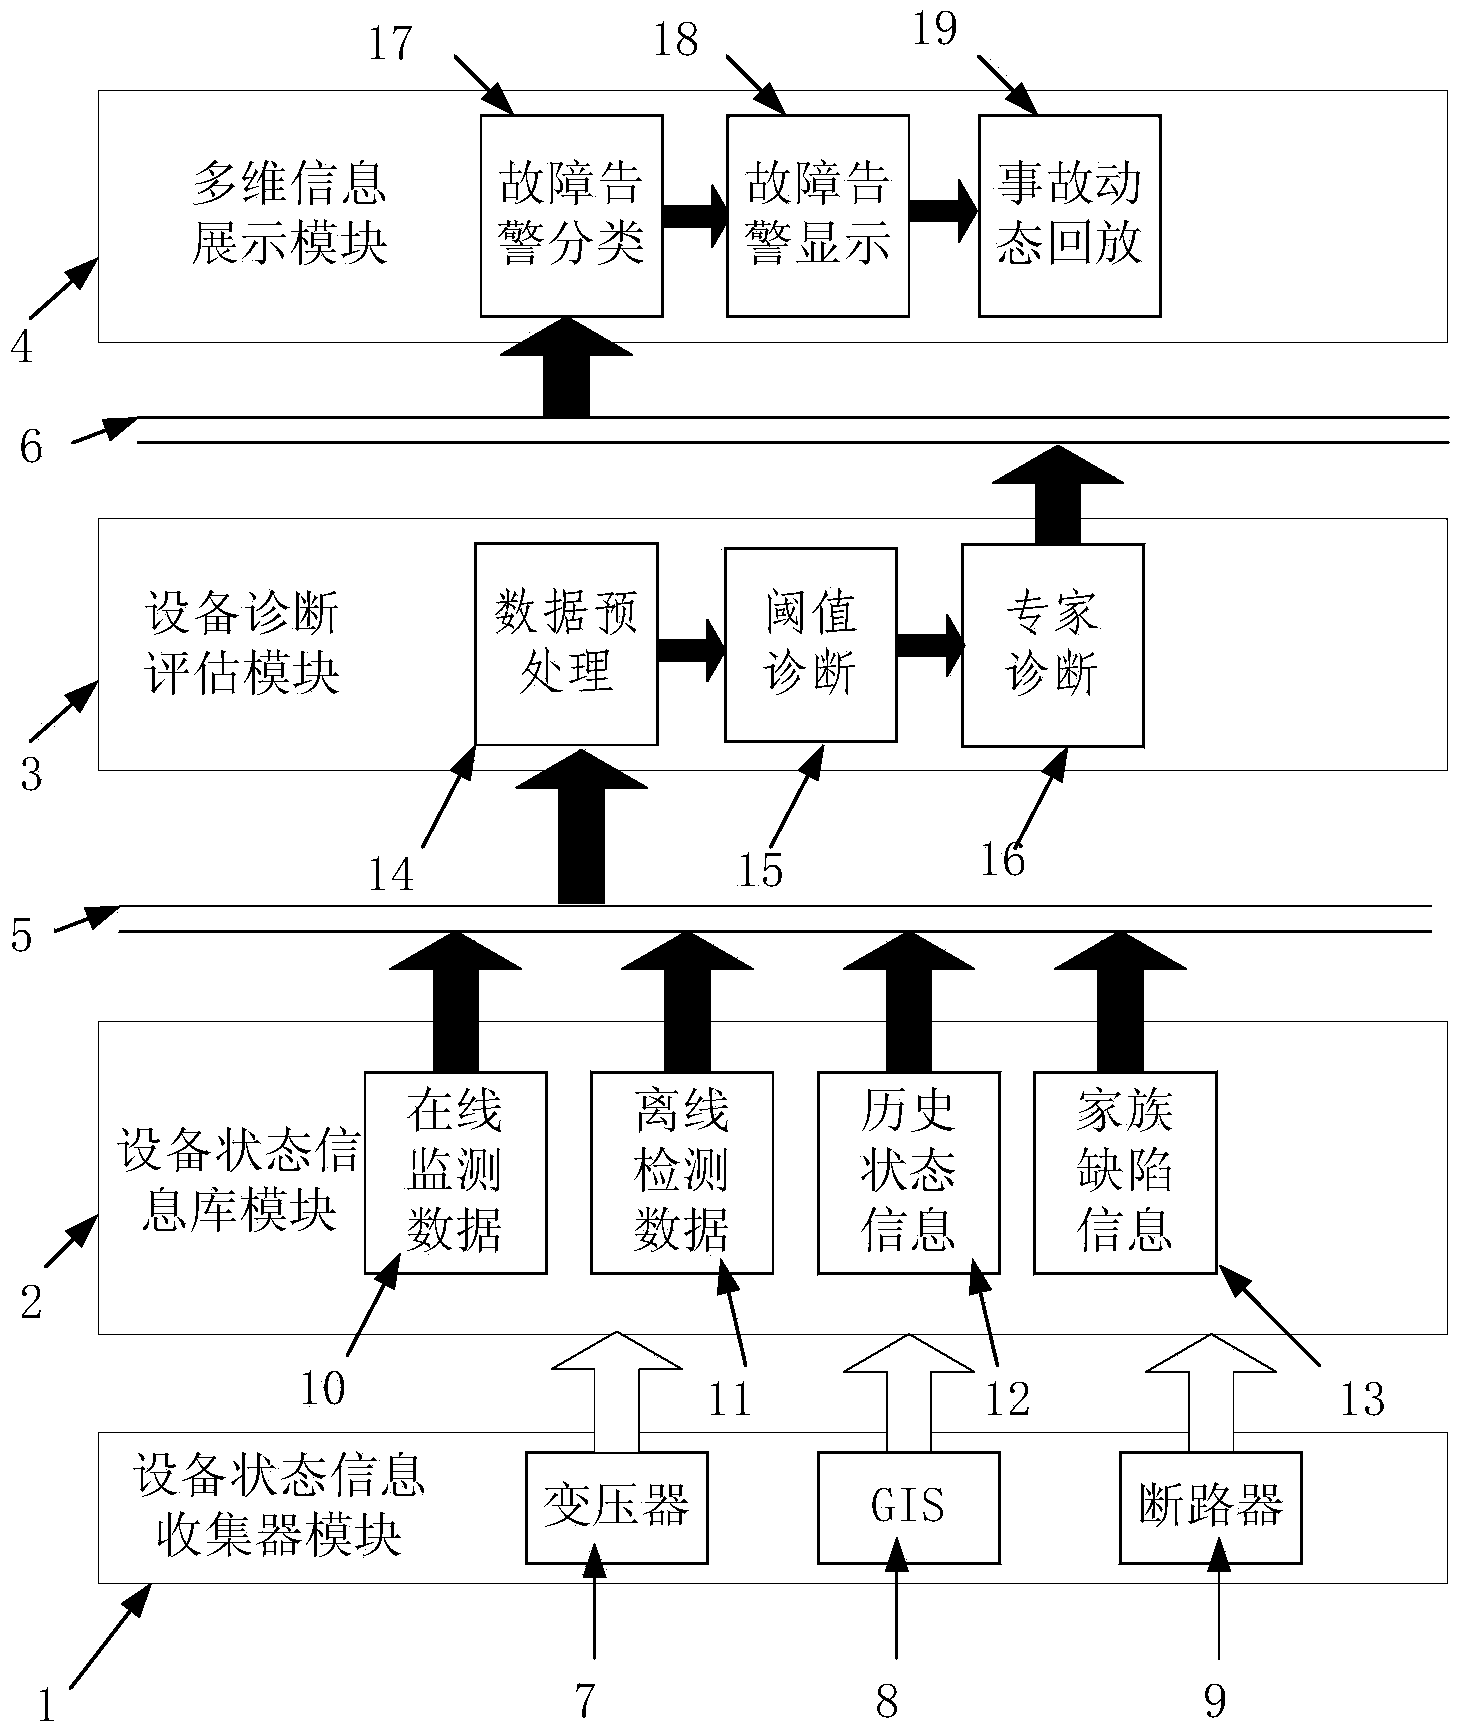 Method for enabling state monitoring information of transformer station primary main equipment to access to regulation and control system